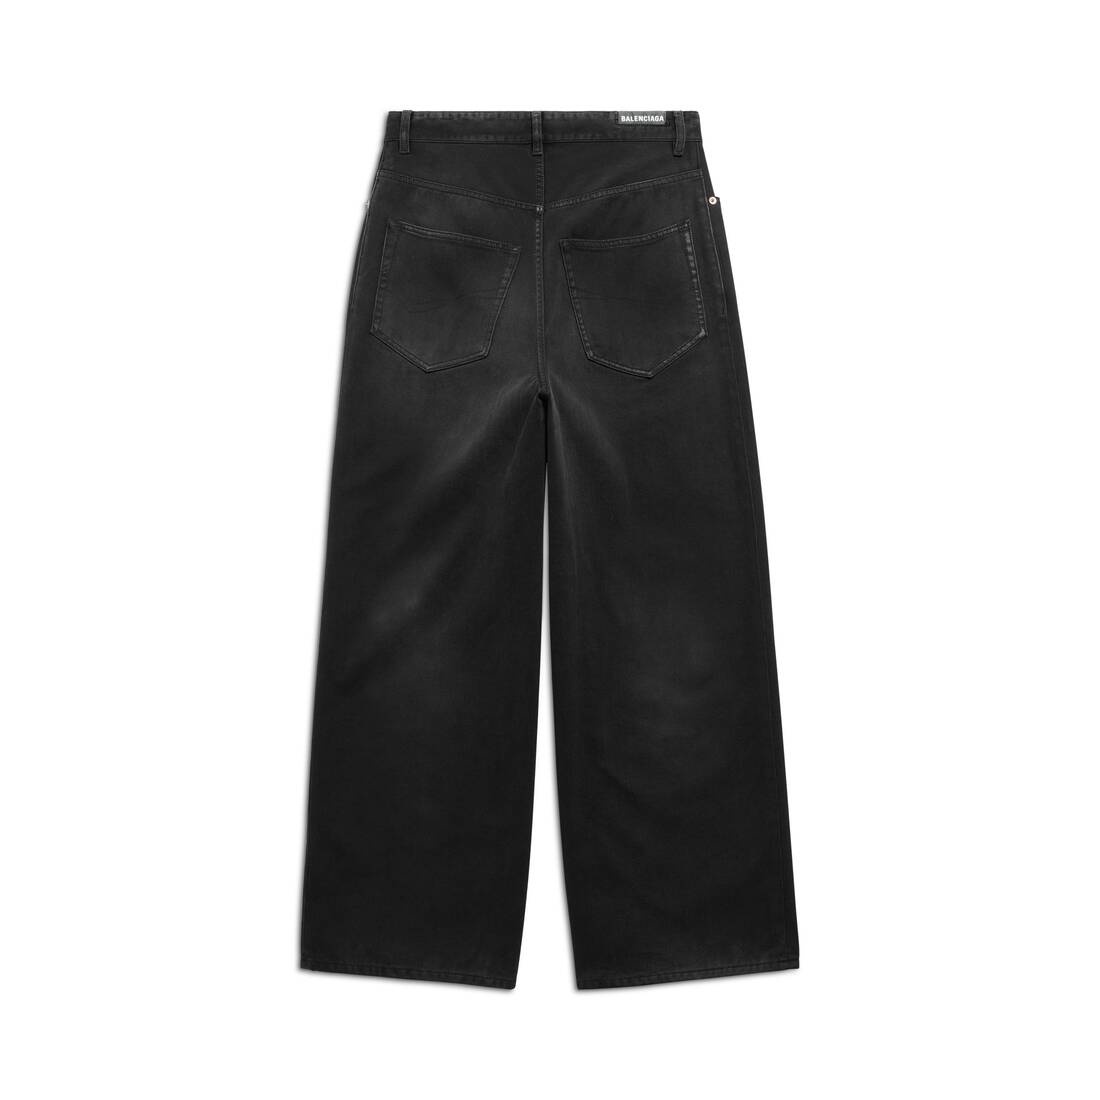 Baggy Pants in Black Faded - 6